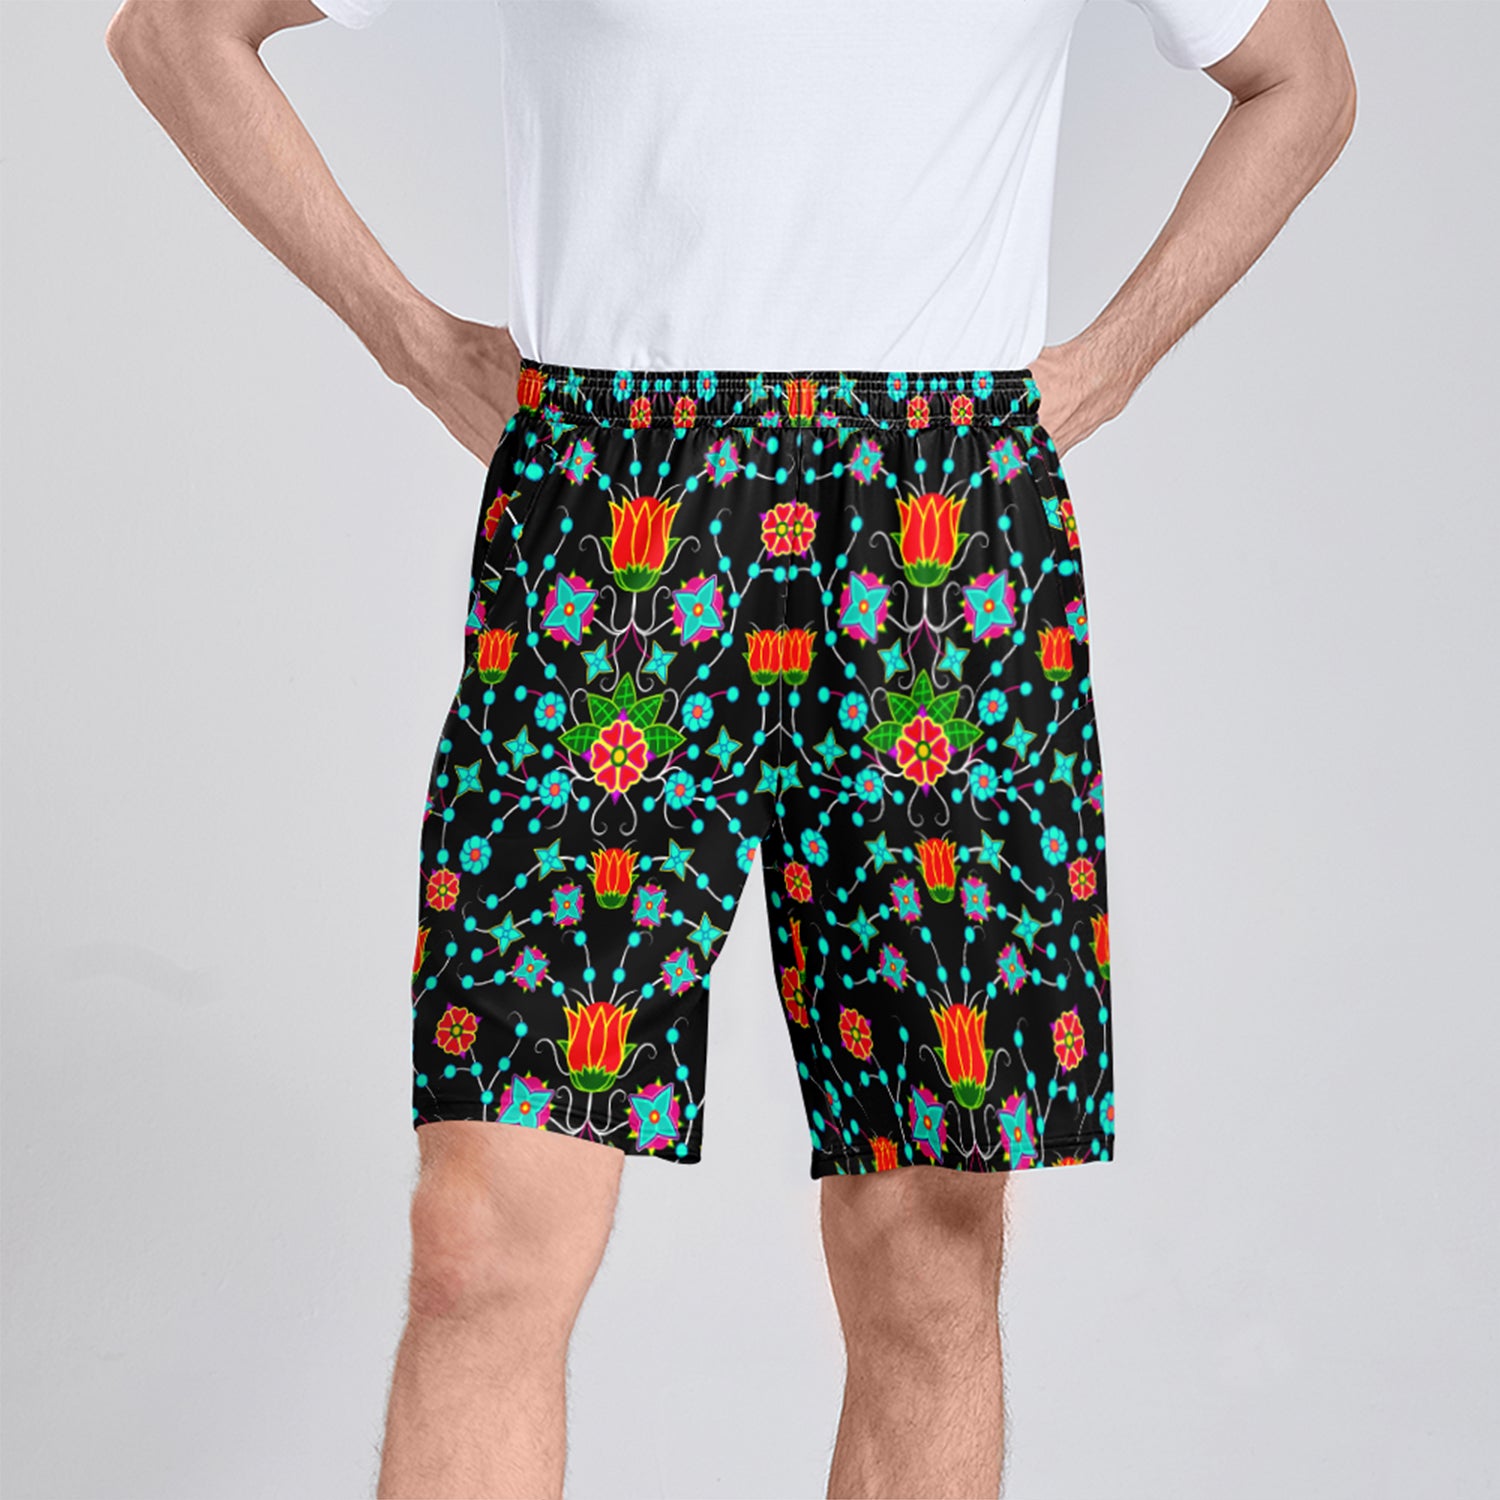 Floral Damask Upgrade Athletic Shorts with Pockets